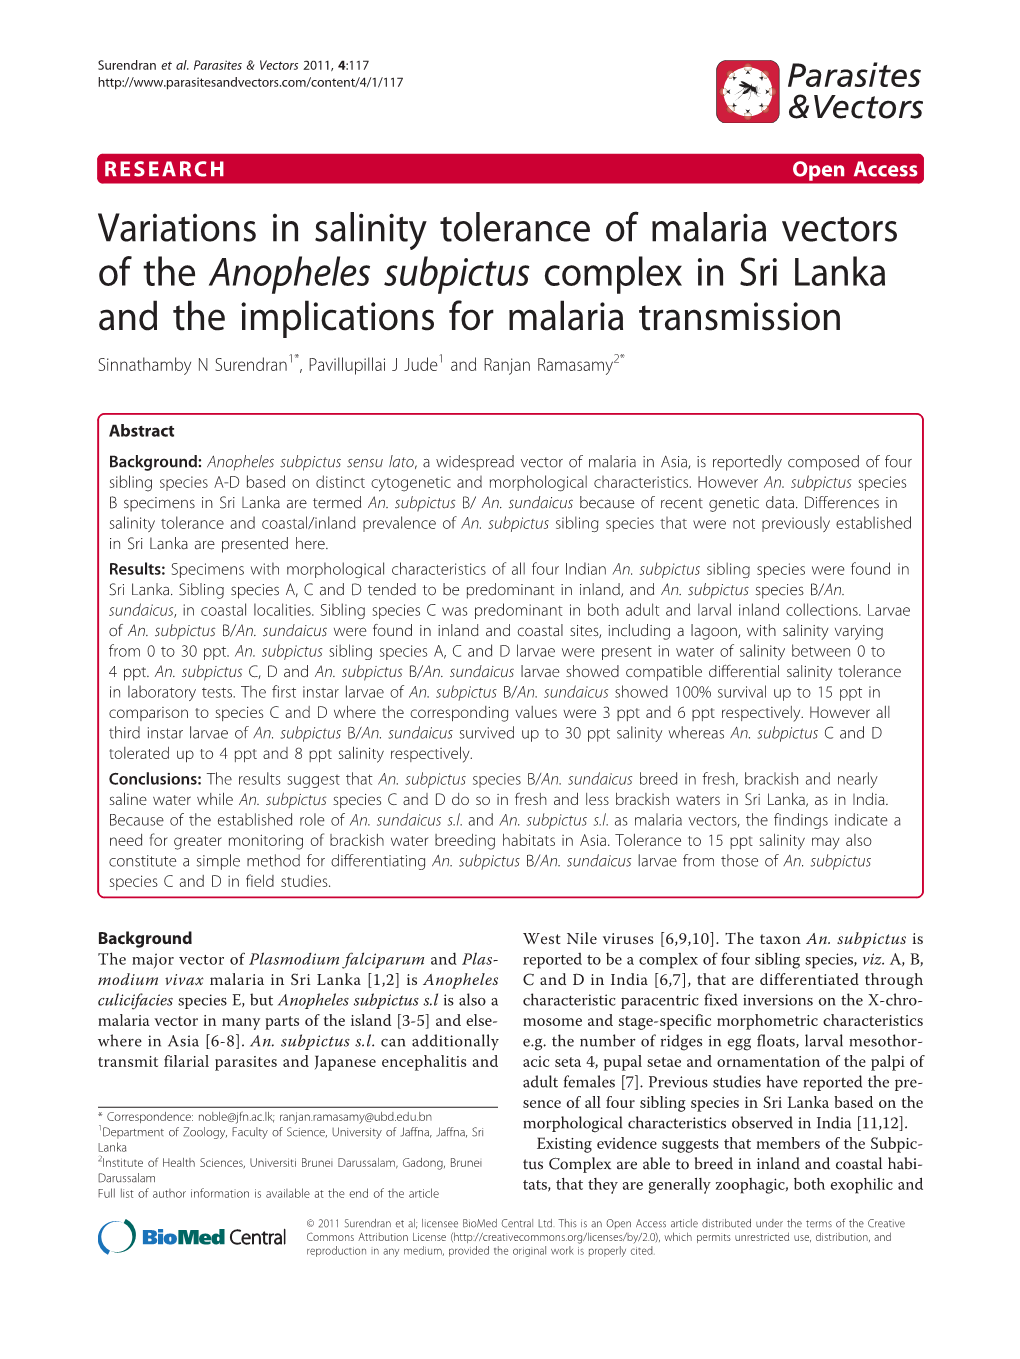 Variations in Salinity Tolerance of Malaria Vectors of the Anopheles